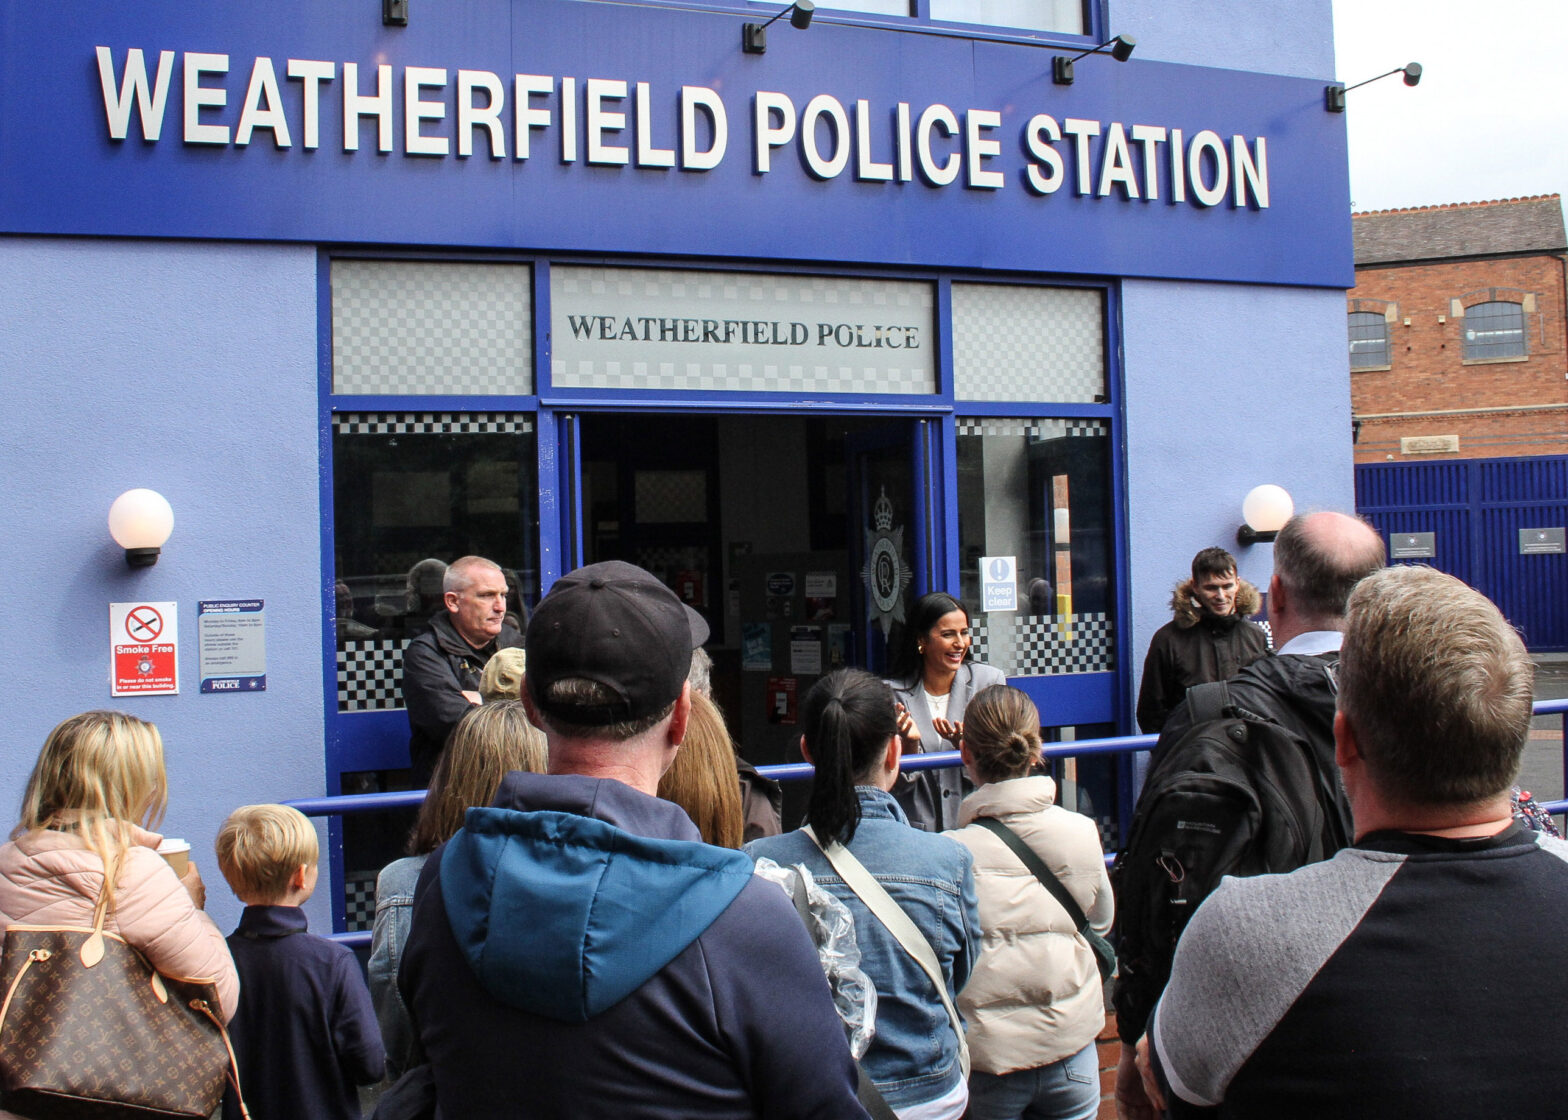 Sair Khan, who plays Alya Nazir, surprises guests at the Weatherfield Police Station for an extra-special Coronation Street Experience tour.